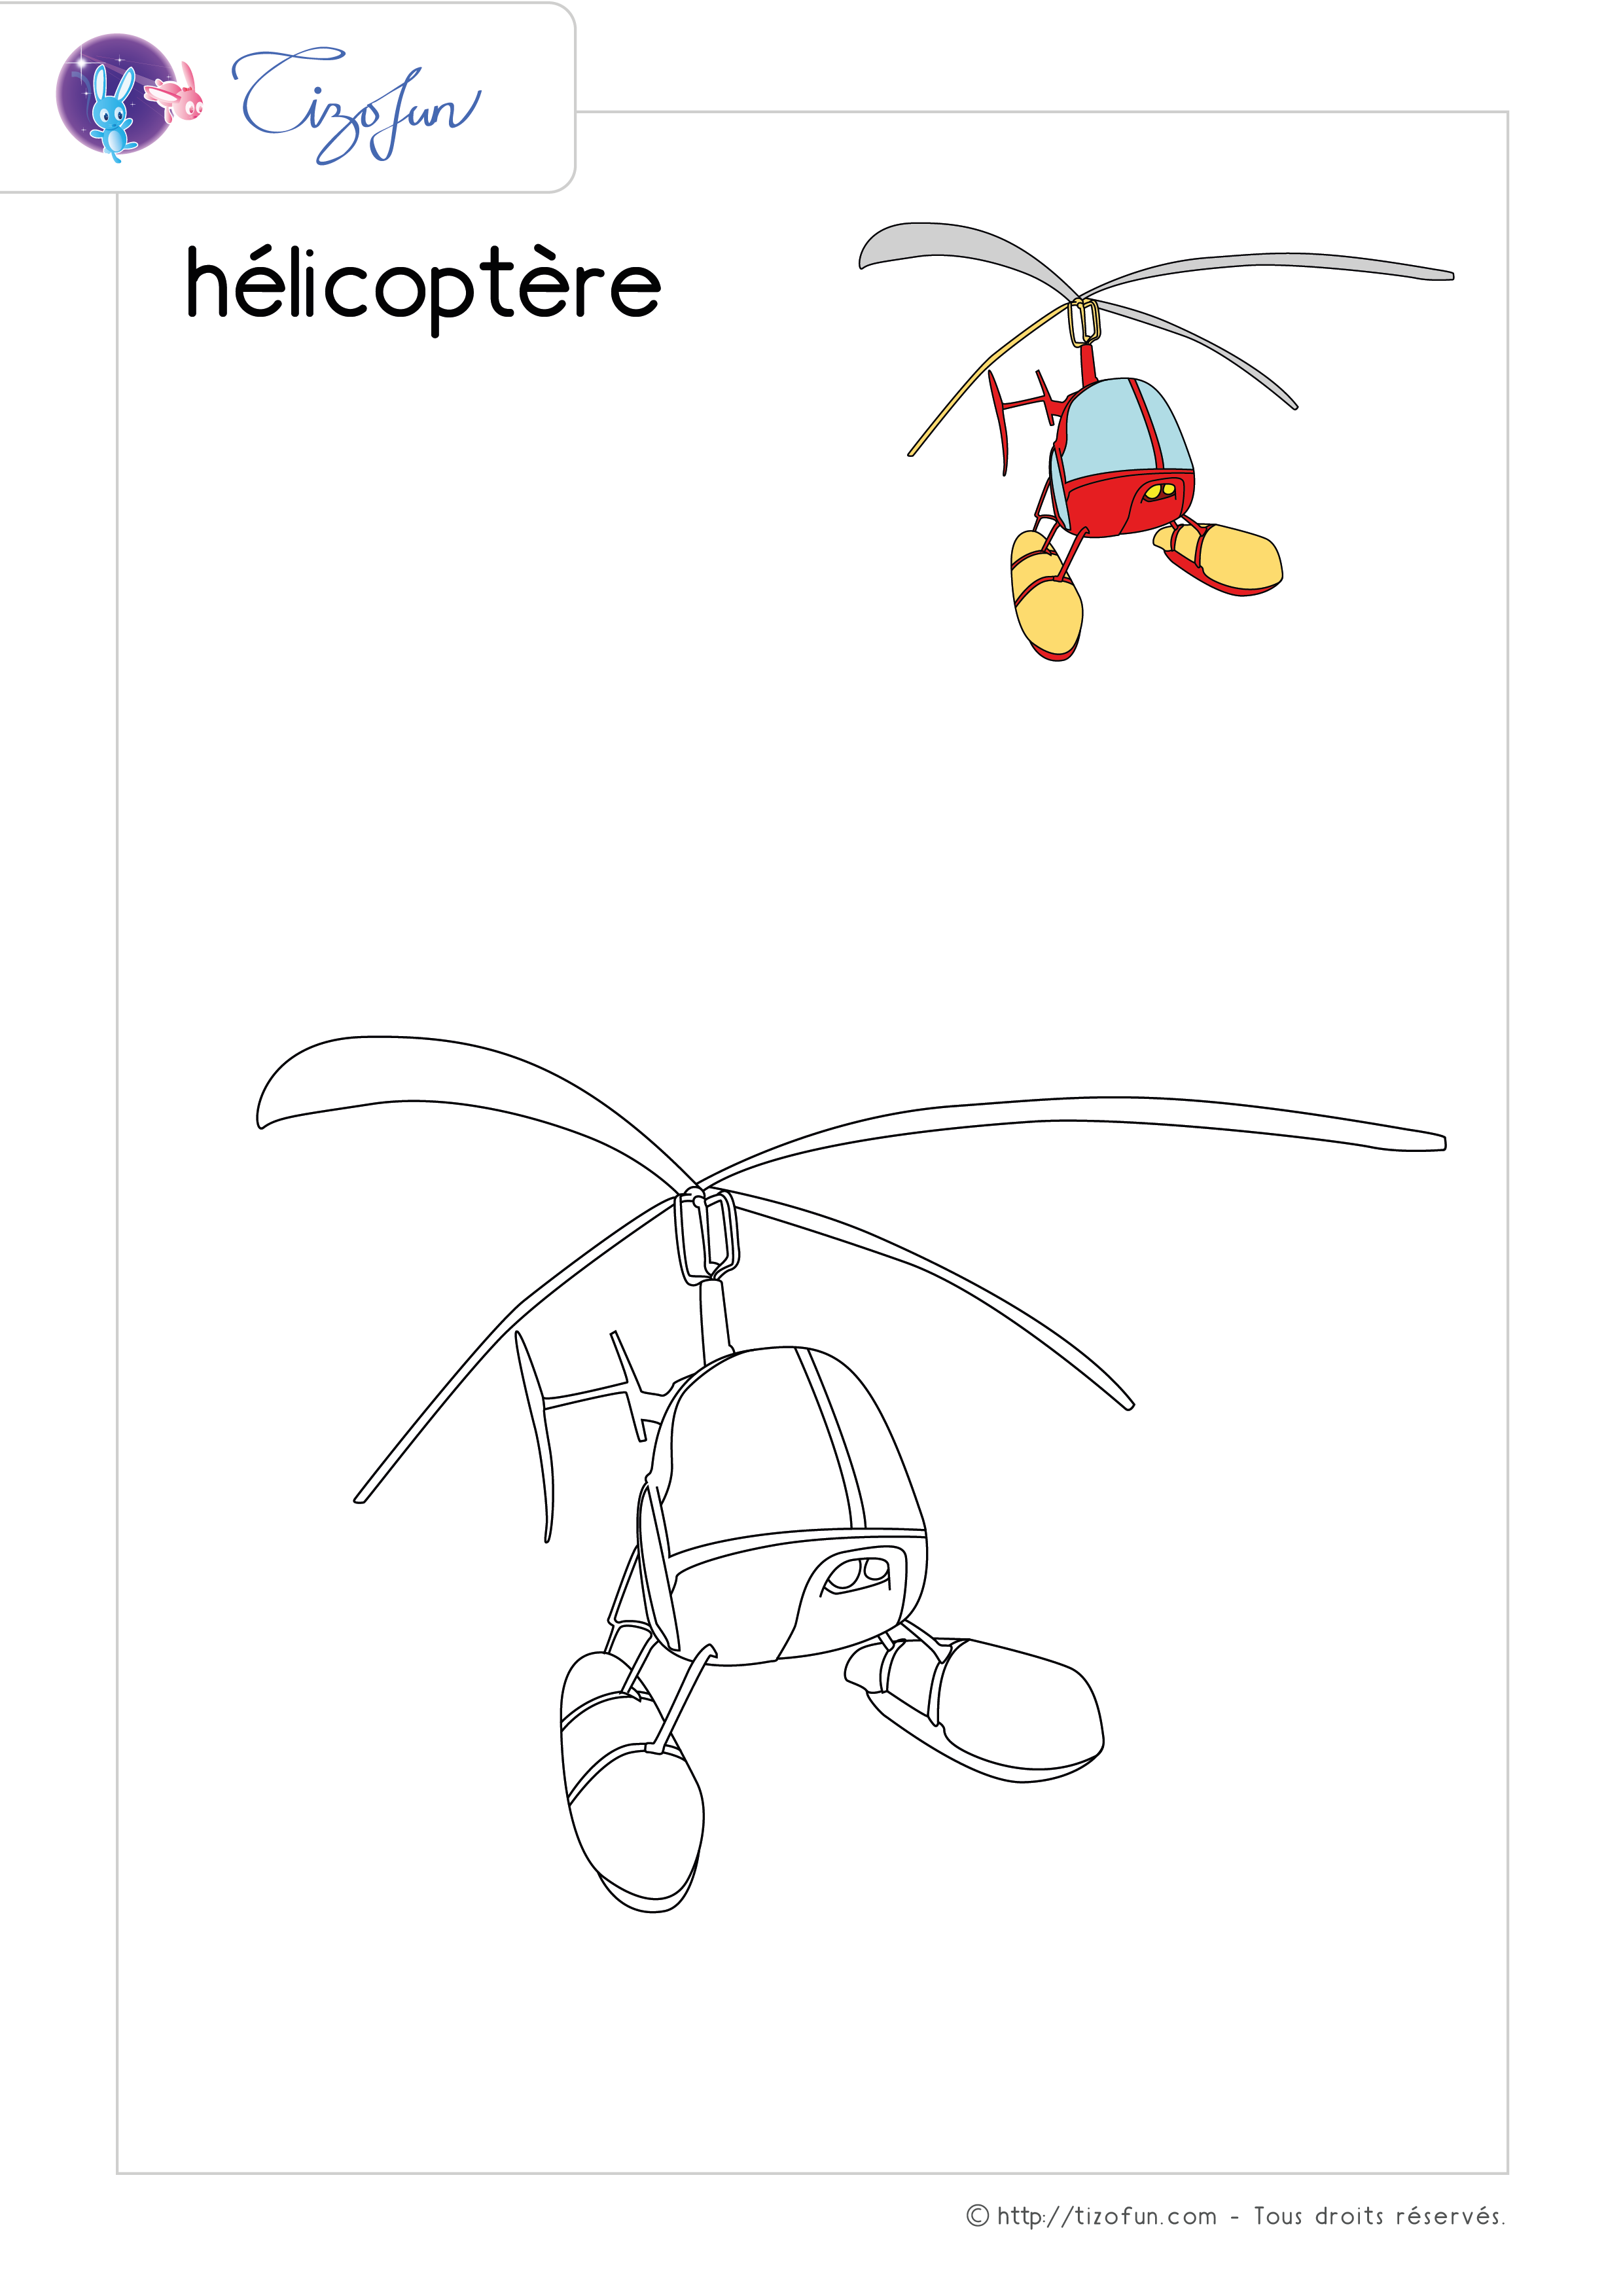 coloriage-transport-dessin-helicoptere